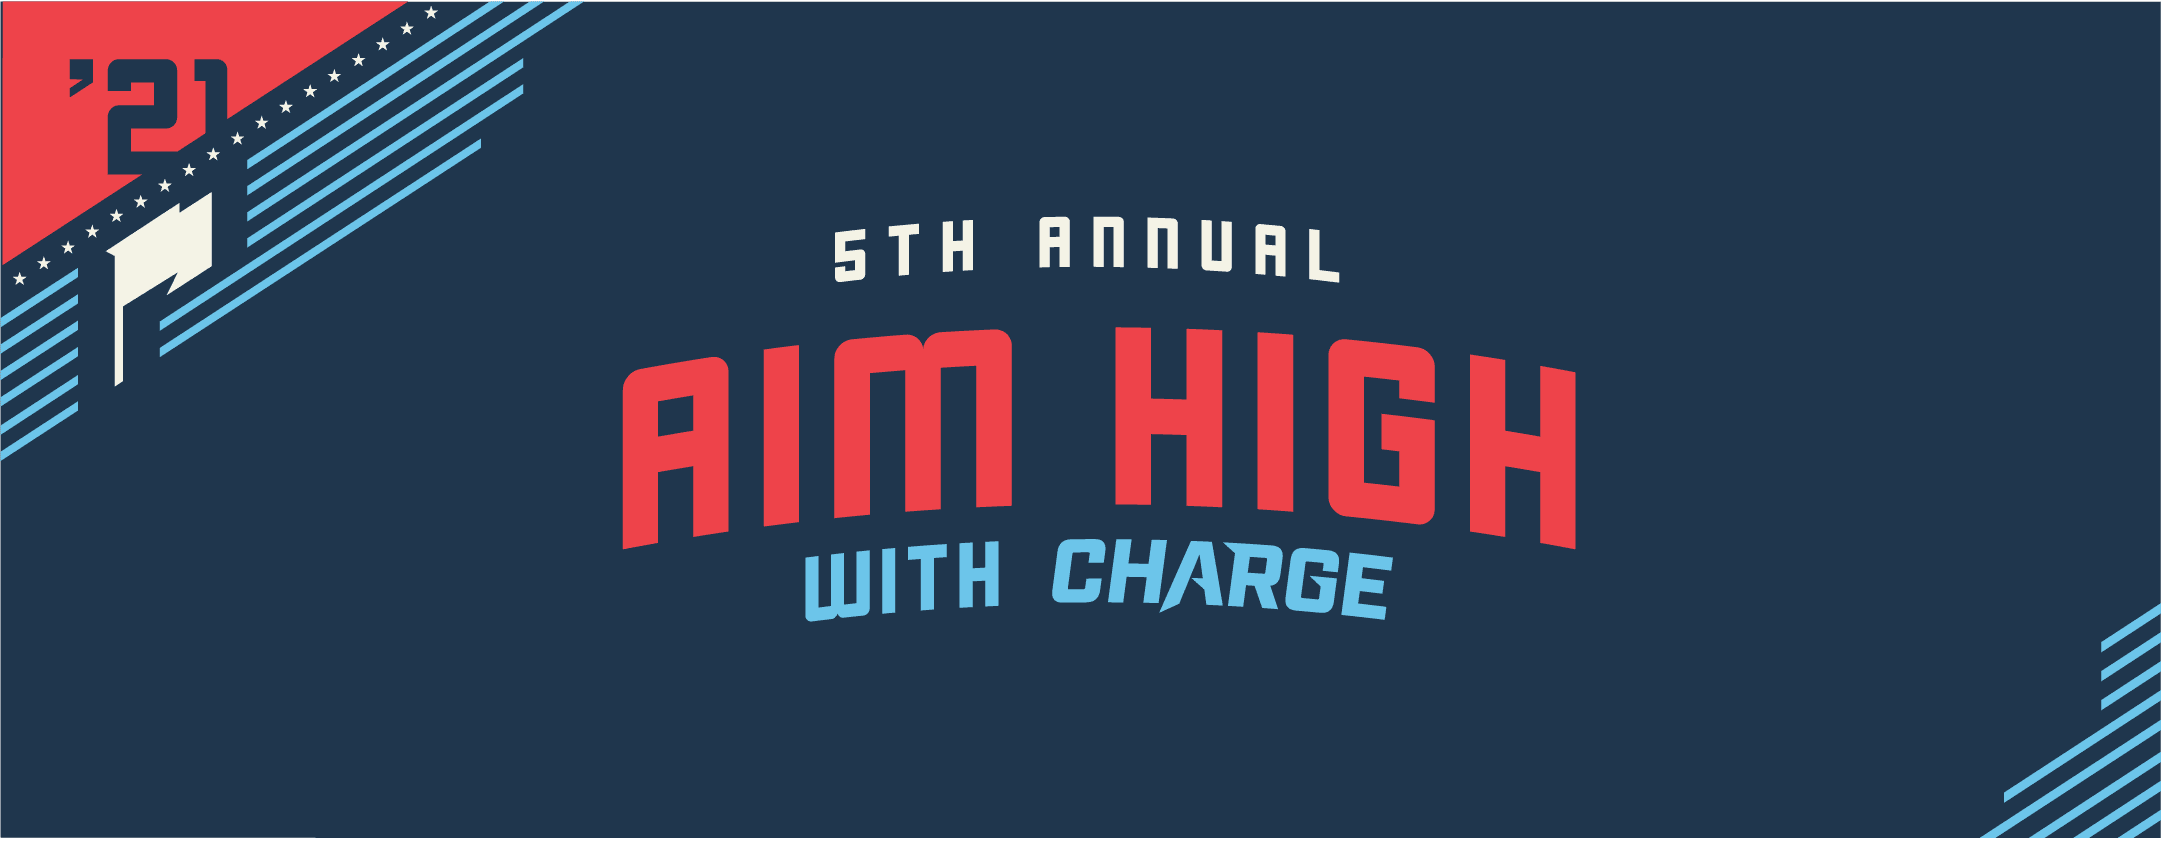 5th Annual Aim High with Charge logo